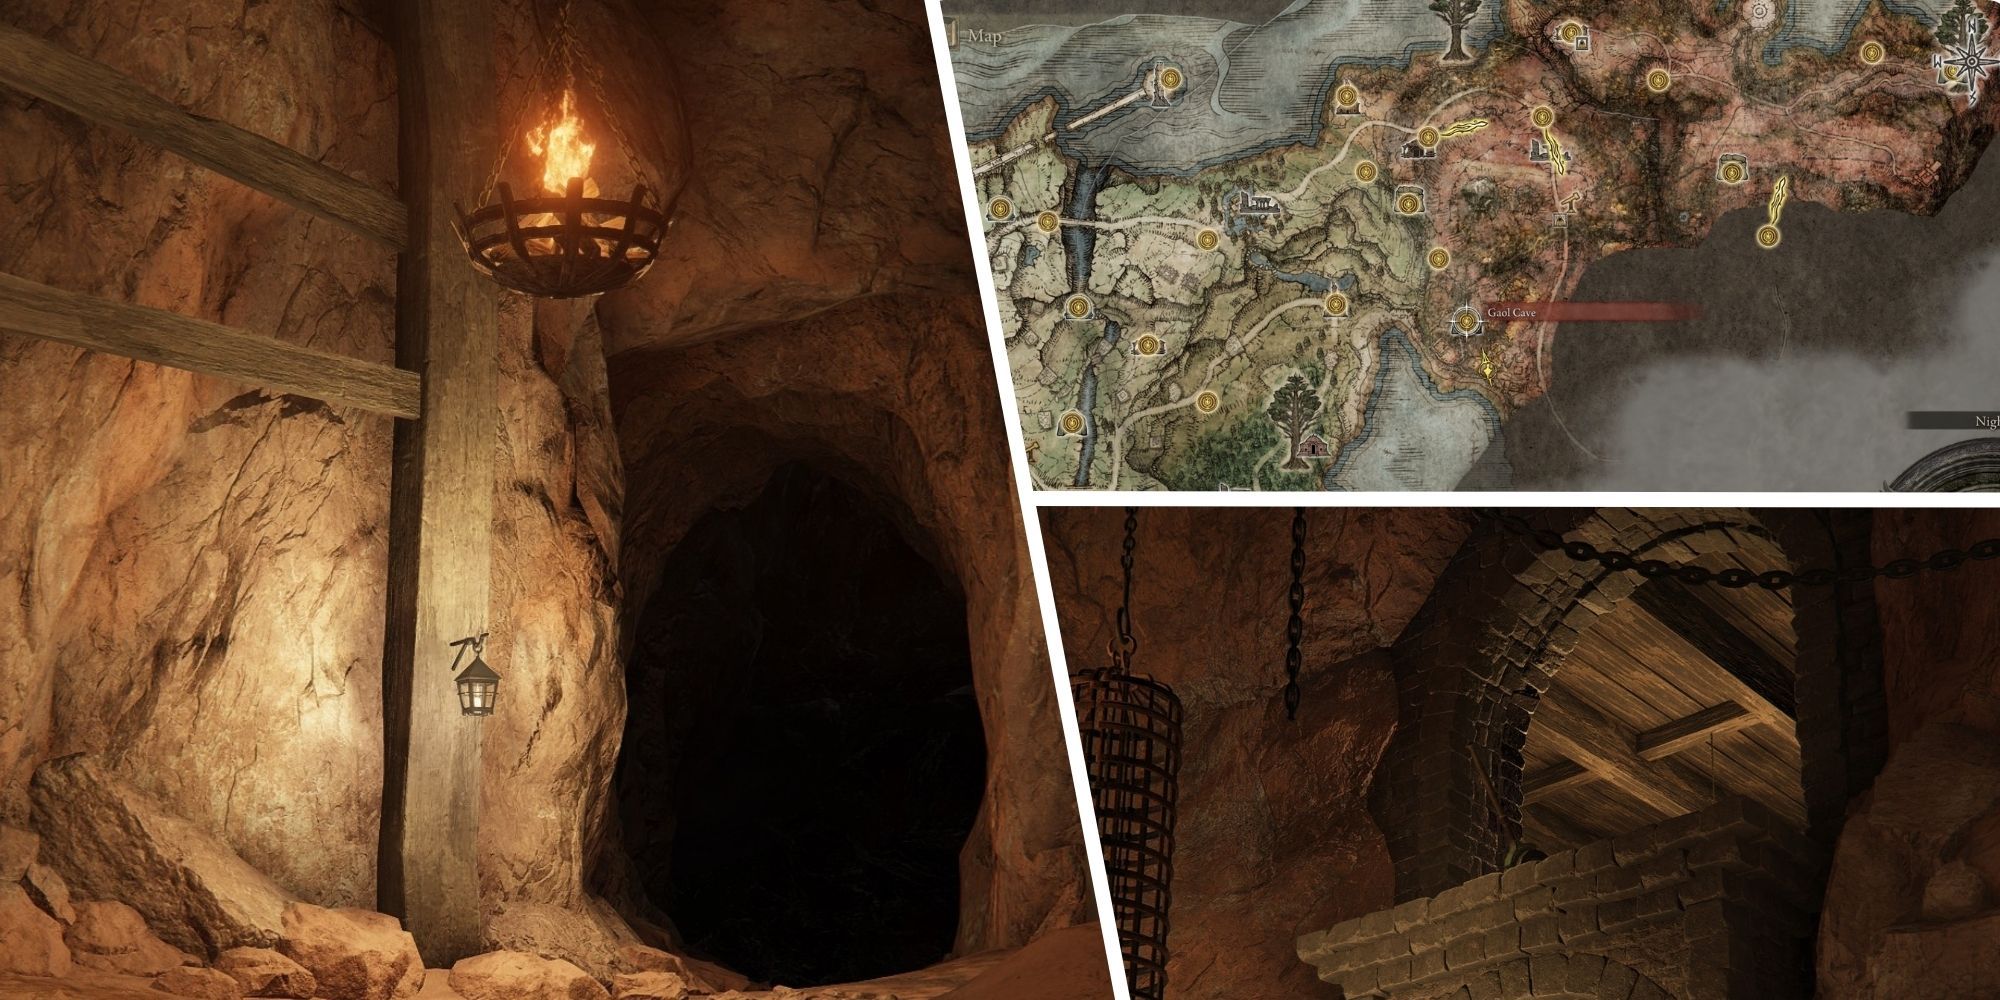 The player looks at Gaol Cave on the map, enters it, and looks at the central lever.